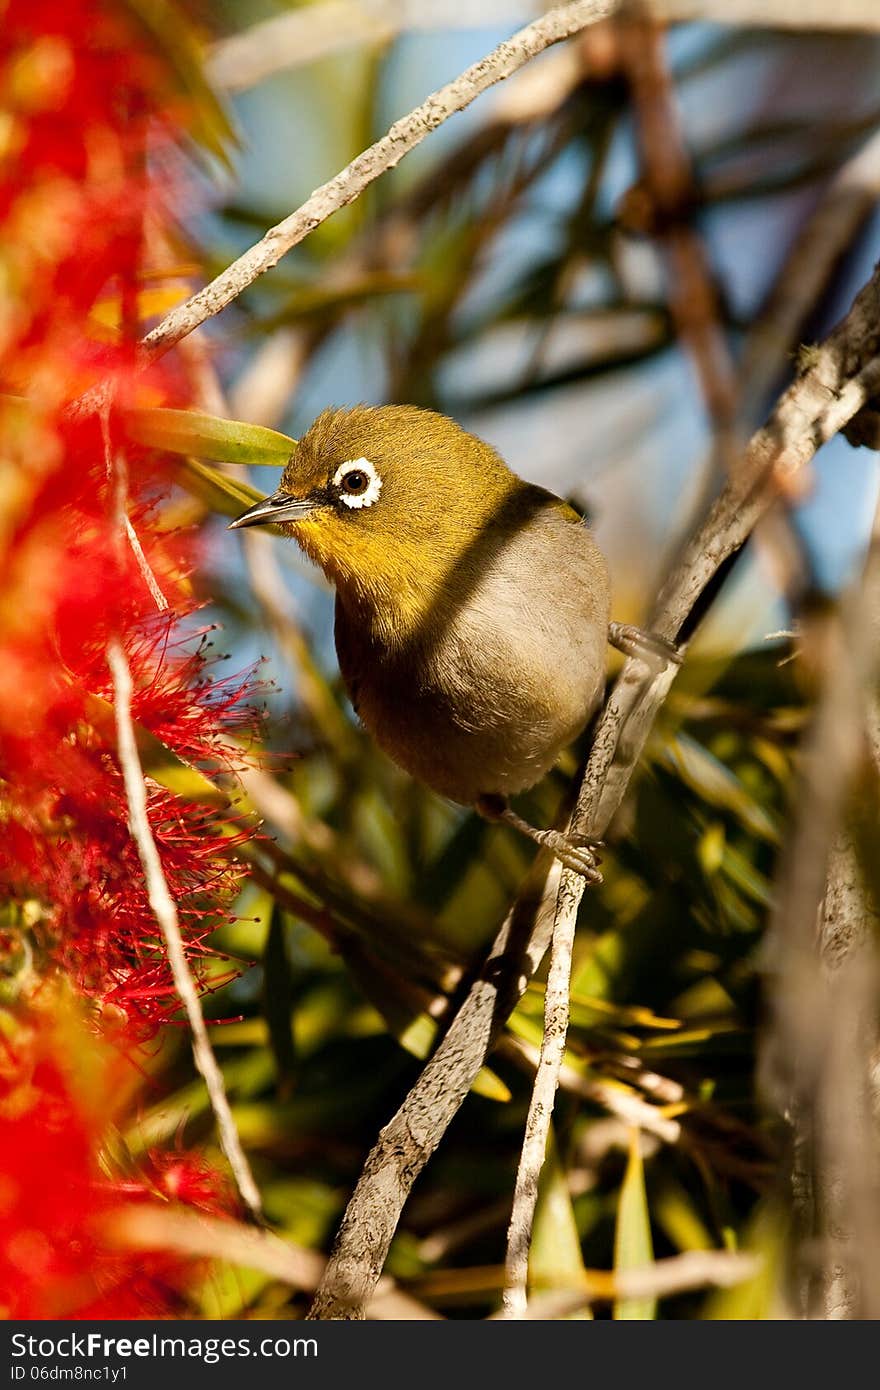 A small green Cape White-eye bird or Zosterops pallidus perches on a red bottlebrush plant in a South African garden.